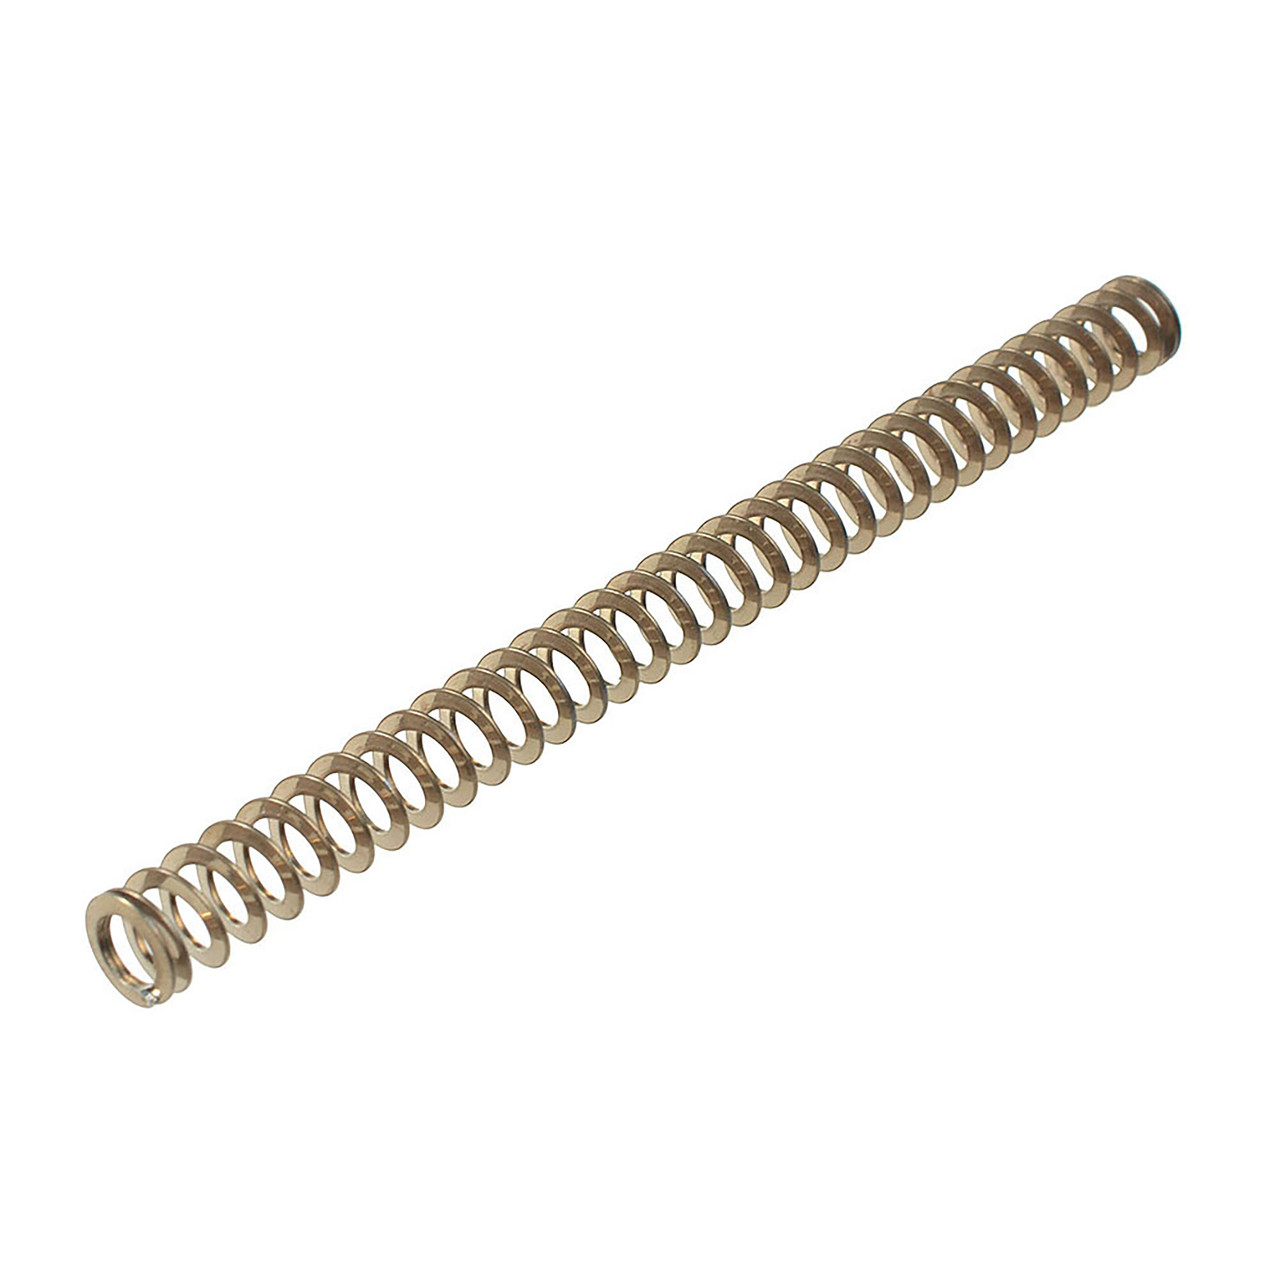 Strike Industries SI-G-RPS-11 11 lb. Reduced Power Recoil Spring for Glock